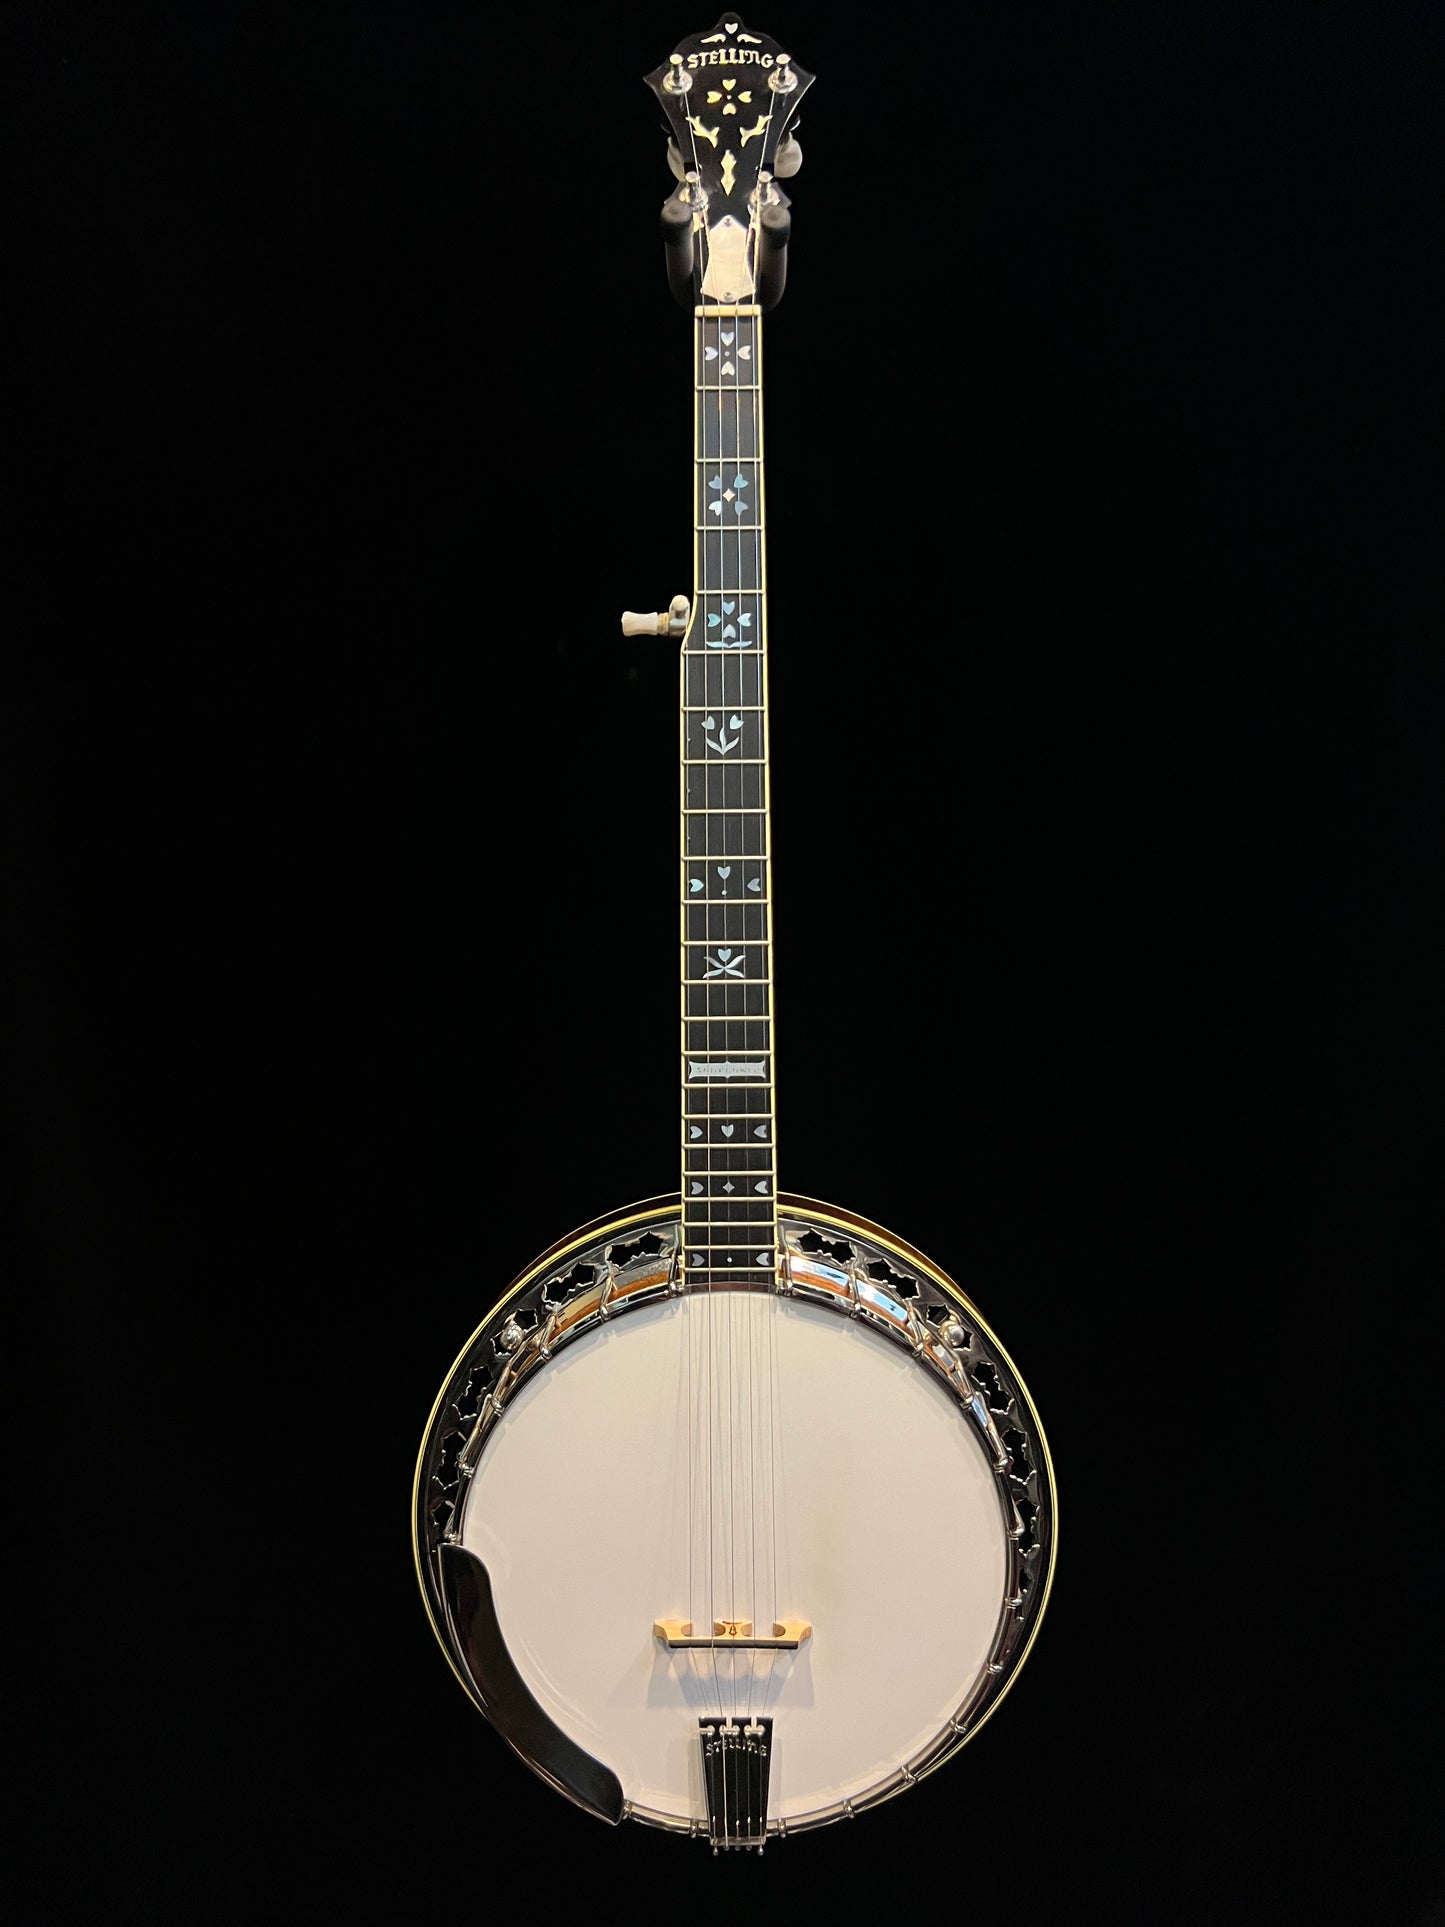 SOLD - 1995 Stelling Banjo The Sunflower - Used